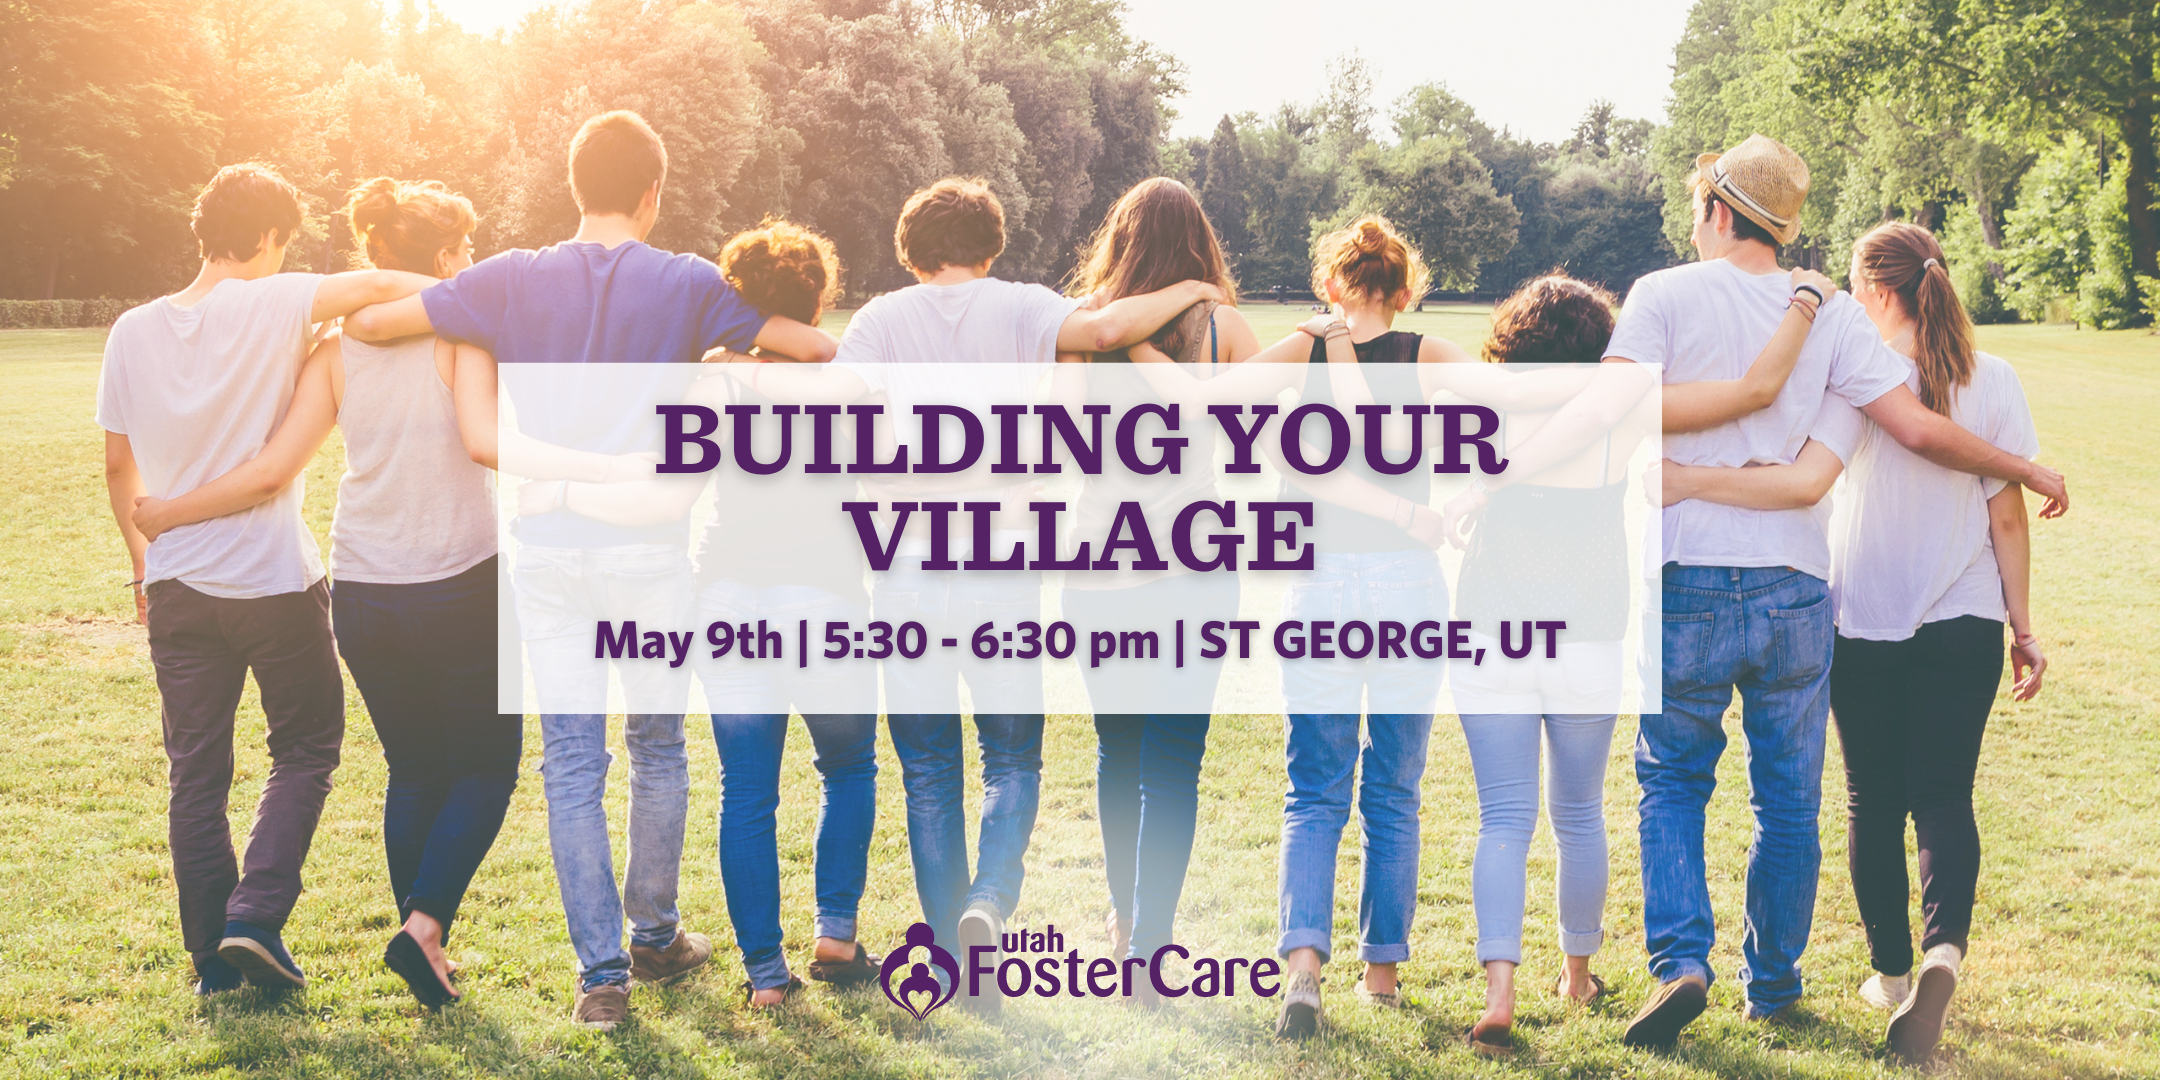 Building Your Village St George - Utah Foster Care